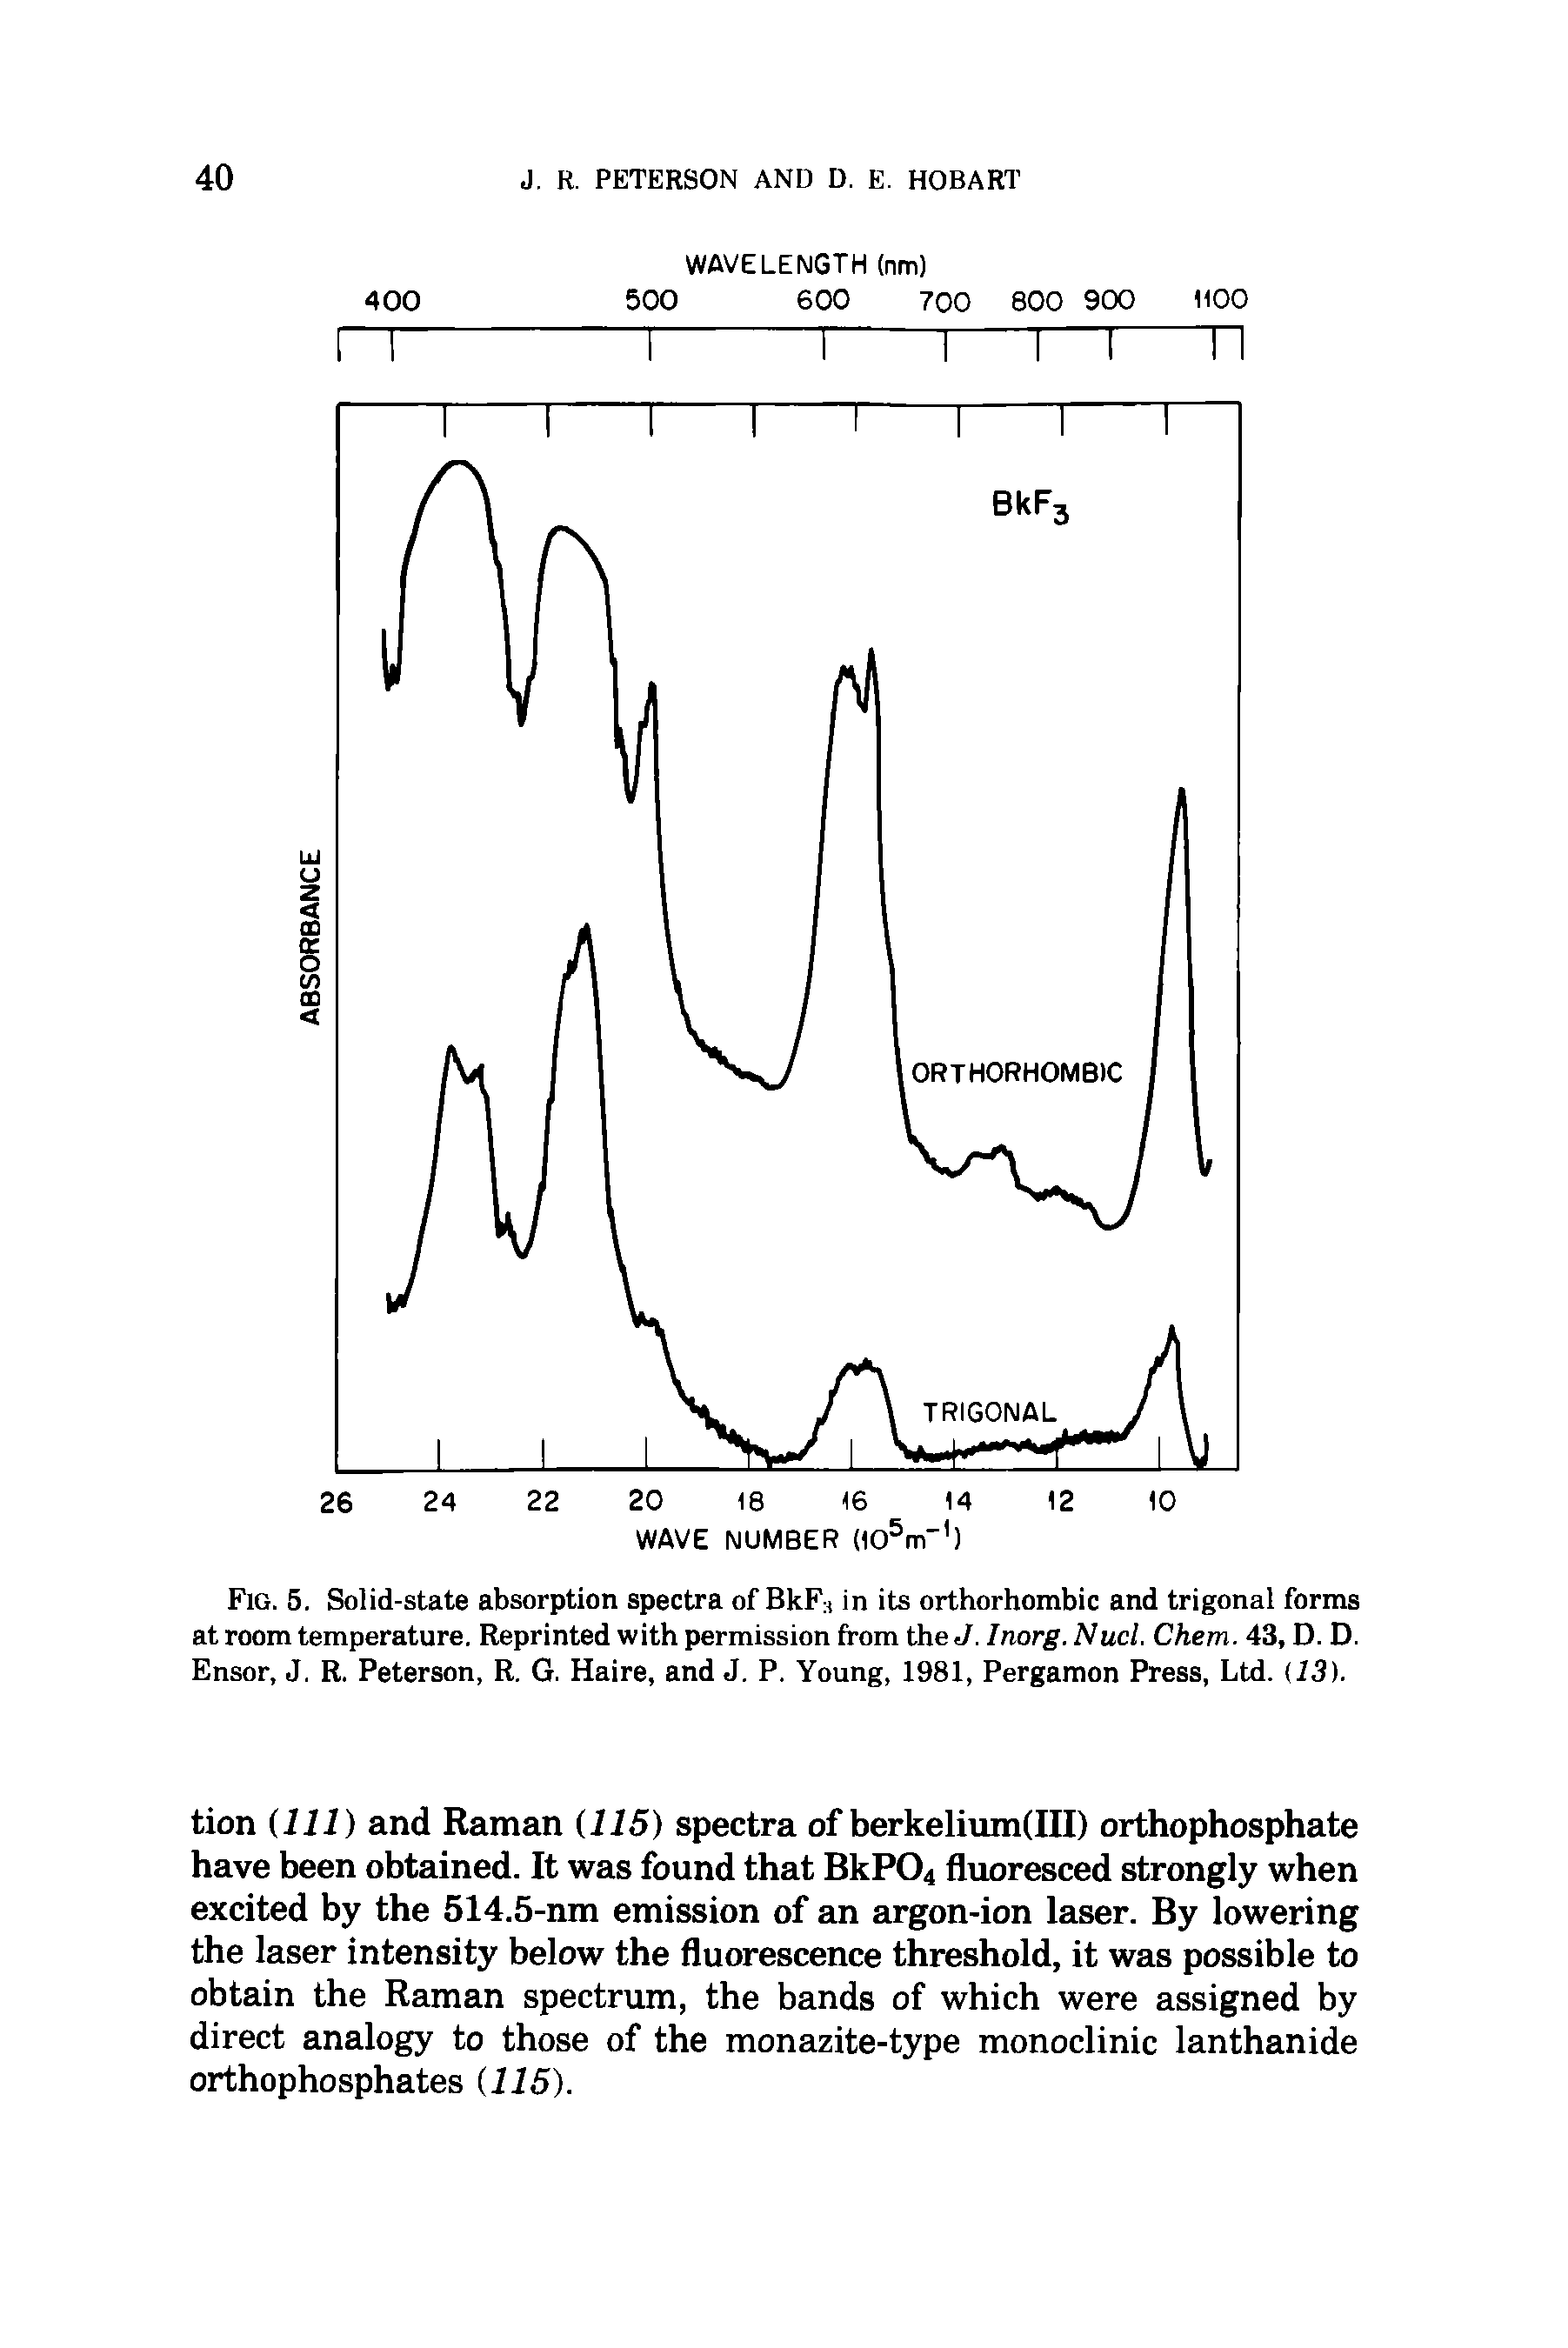 Fig. 5. Solid-state absorption spectra of BkF ) in its orthorhombic and trigonal forms at room temperature. Reprinted with permission from the J. Inorg. Nucl. Chem. 43, D. D. Ensor, J. R. Peterson, R. G. Haire, and J. P. Young, 1981, Pergamon Press, Ltd. (13).